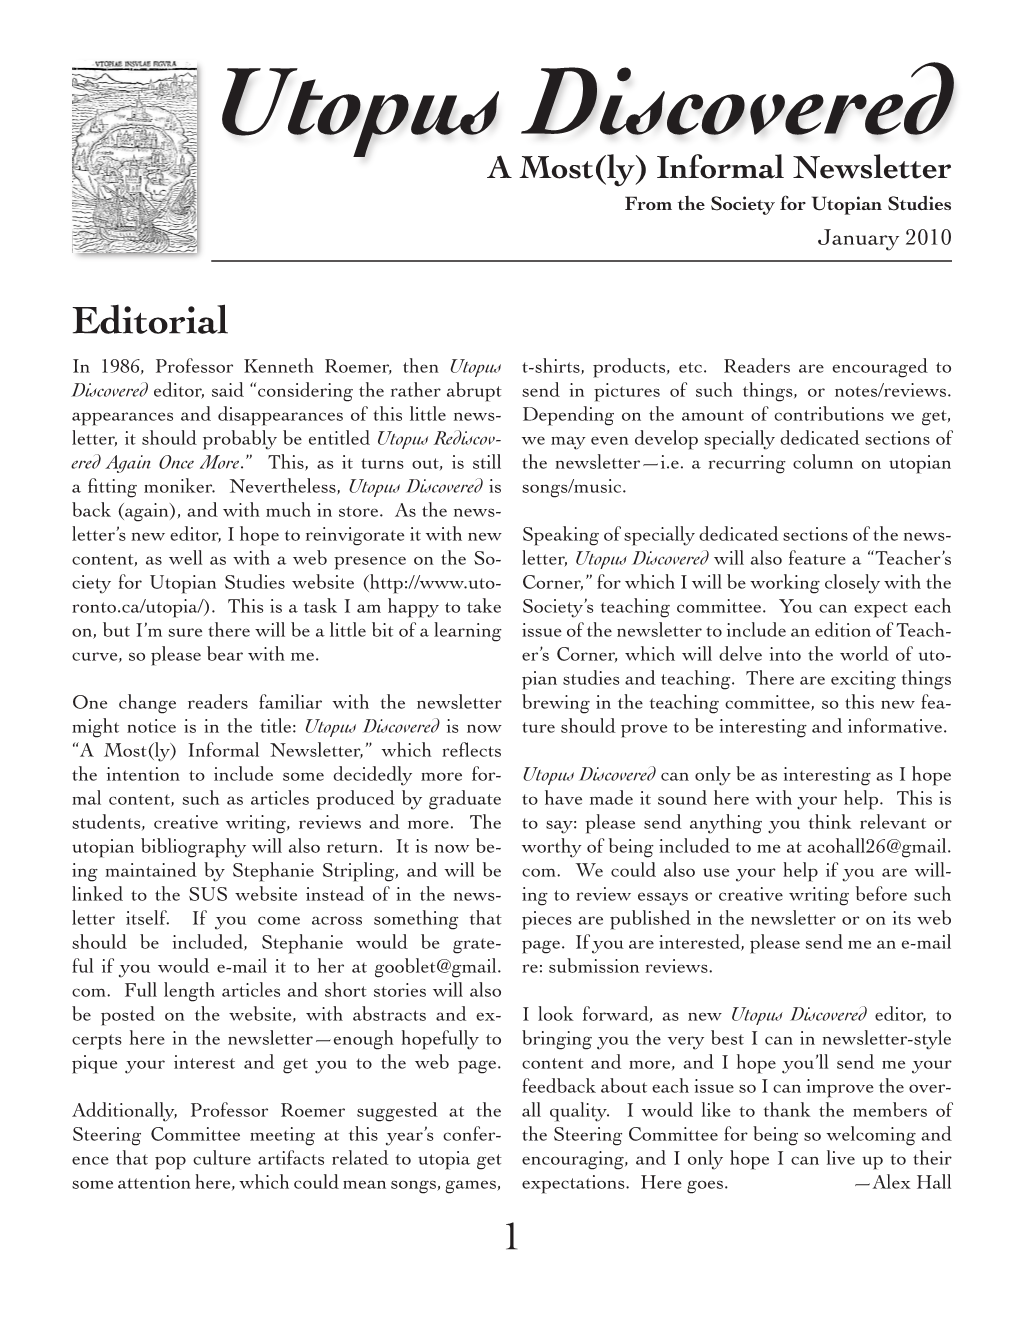 Utopus Discovered a Most(Ly) Informal Newsletter from the Society for Utopian Studies January 2010